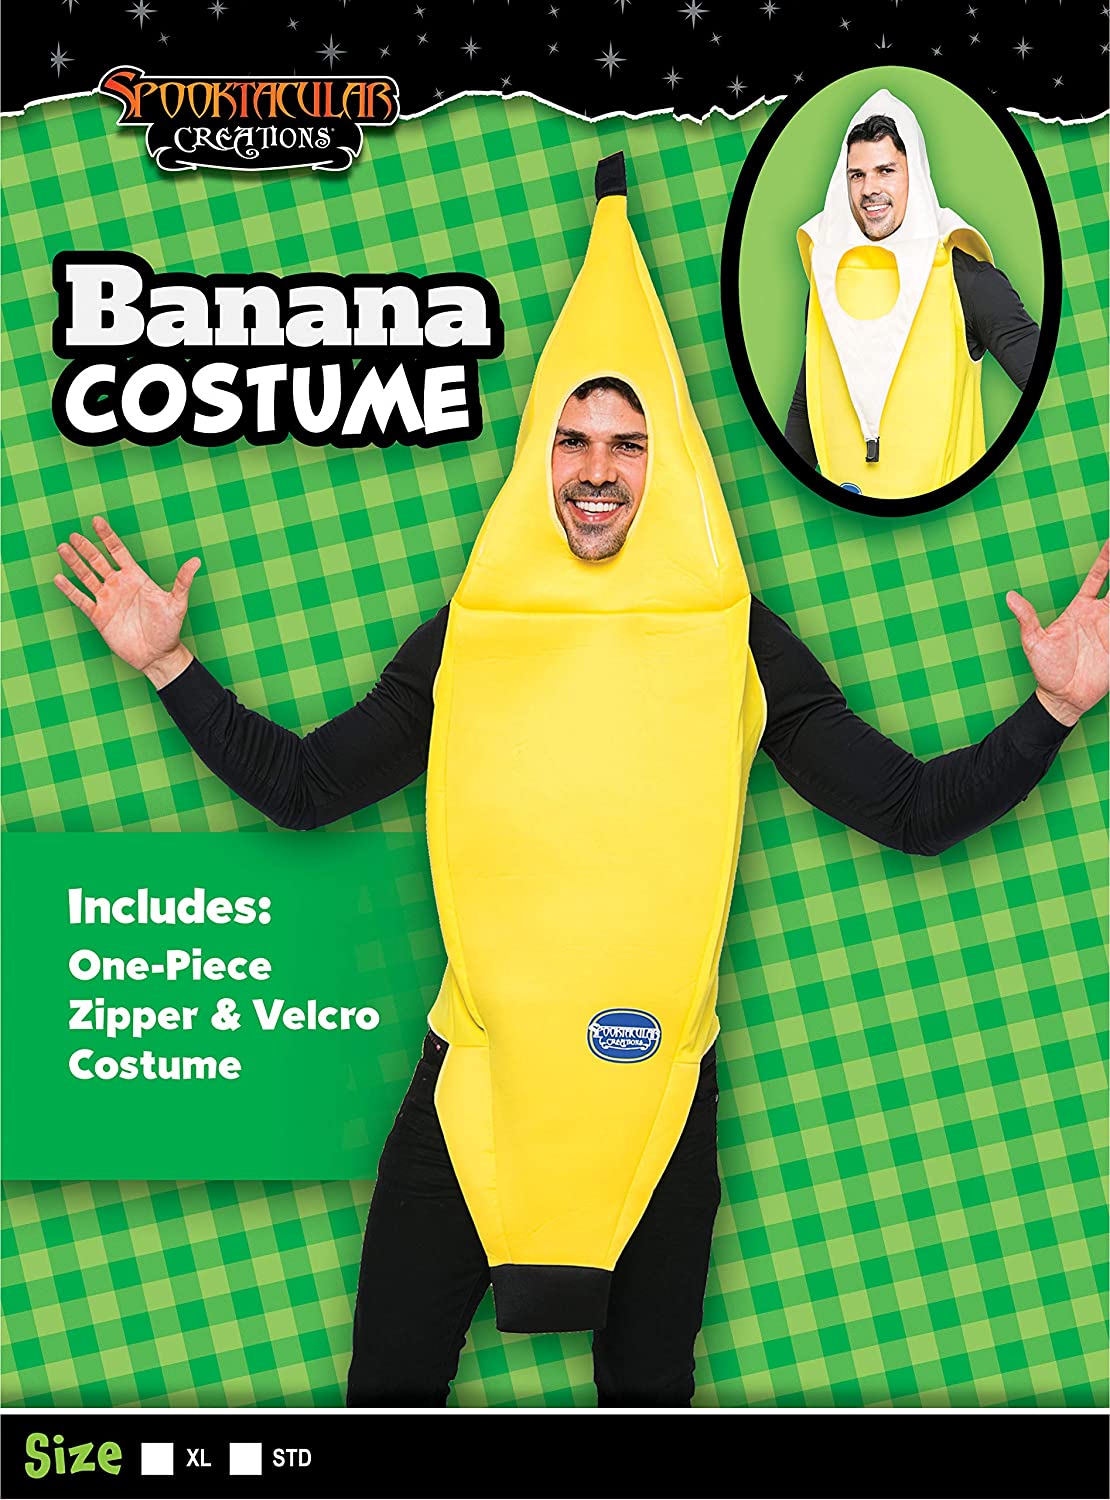 Spooktacular Creations Appealing Banana Costume Adult Set for Halloween Dress Up Party Roleplay Cosplay - image 4 of 5